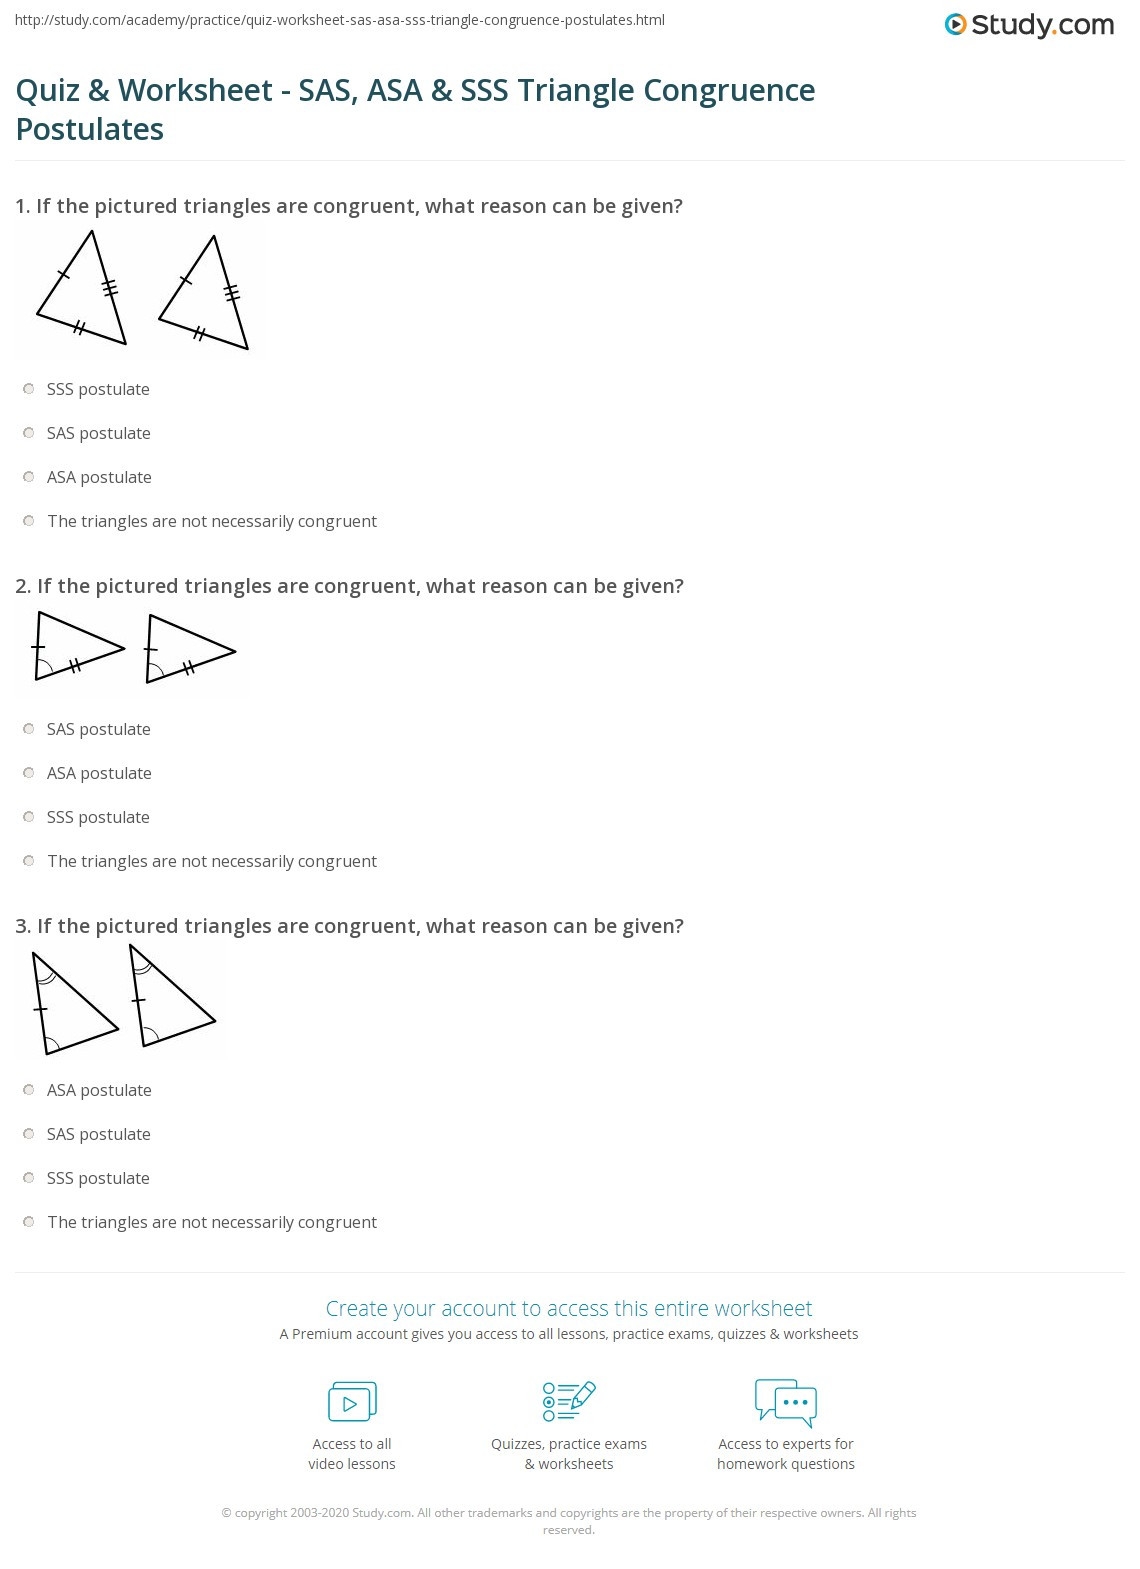 Triangle Congruence Worksheet Answers Quiz &amp; Worksheet Sas asa &amp; Sss Triangle Congruence